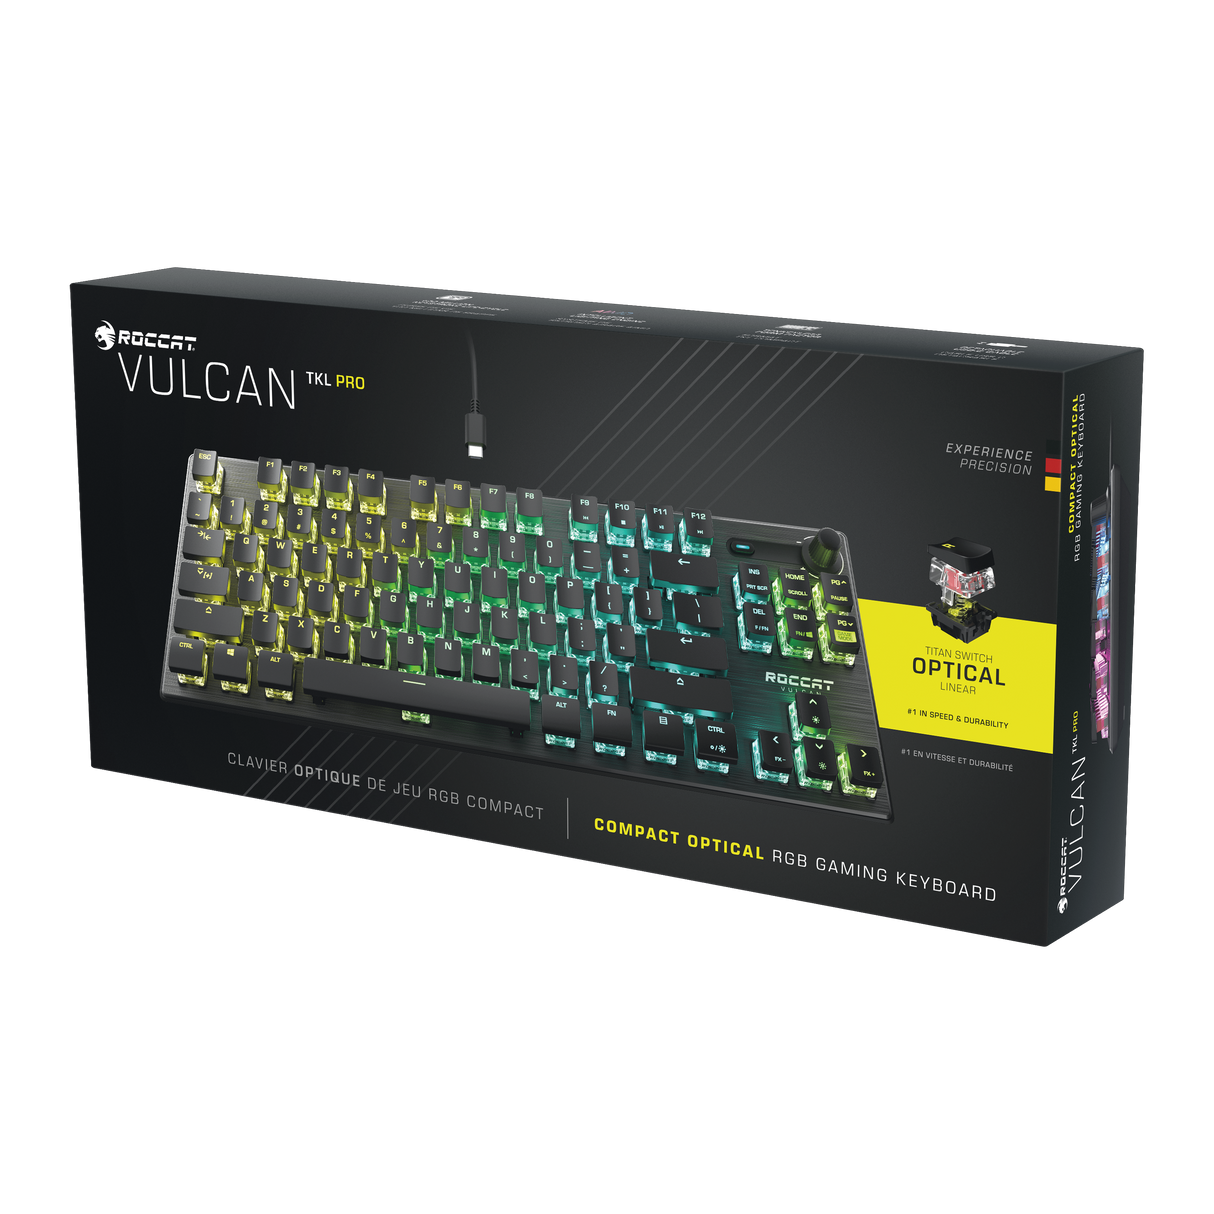 Roccat Vulcan Pro gaming keyboard uses optical switch that's 40x faster  than mechanical switches - CNET